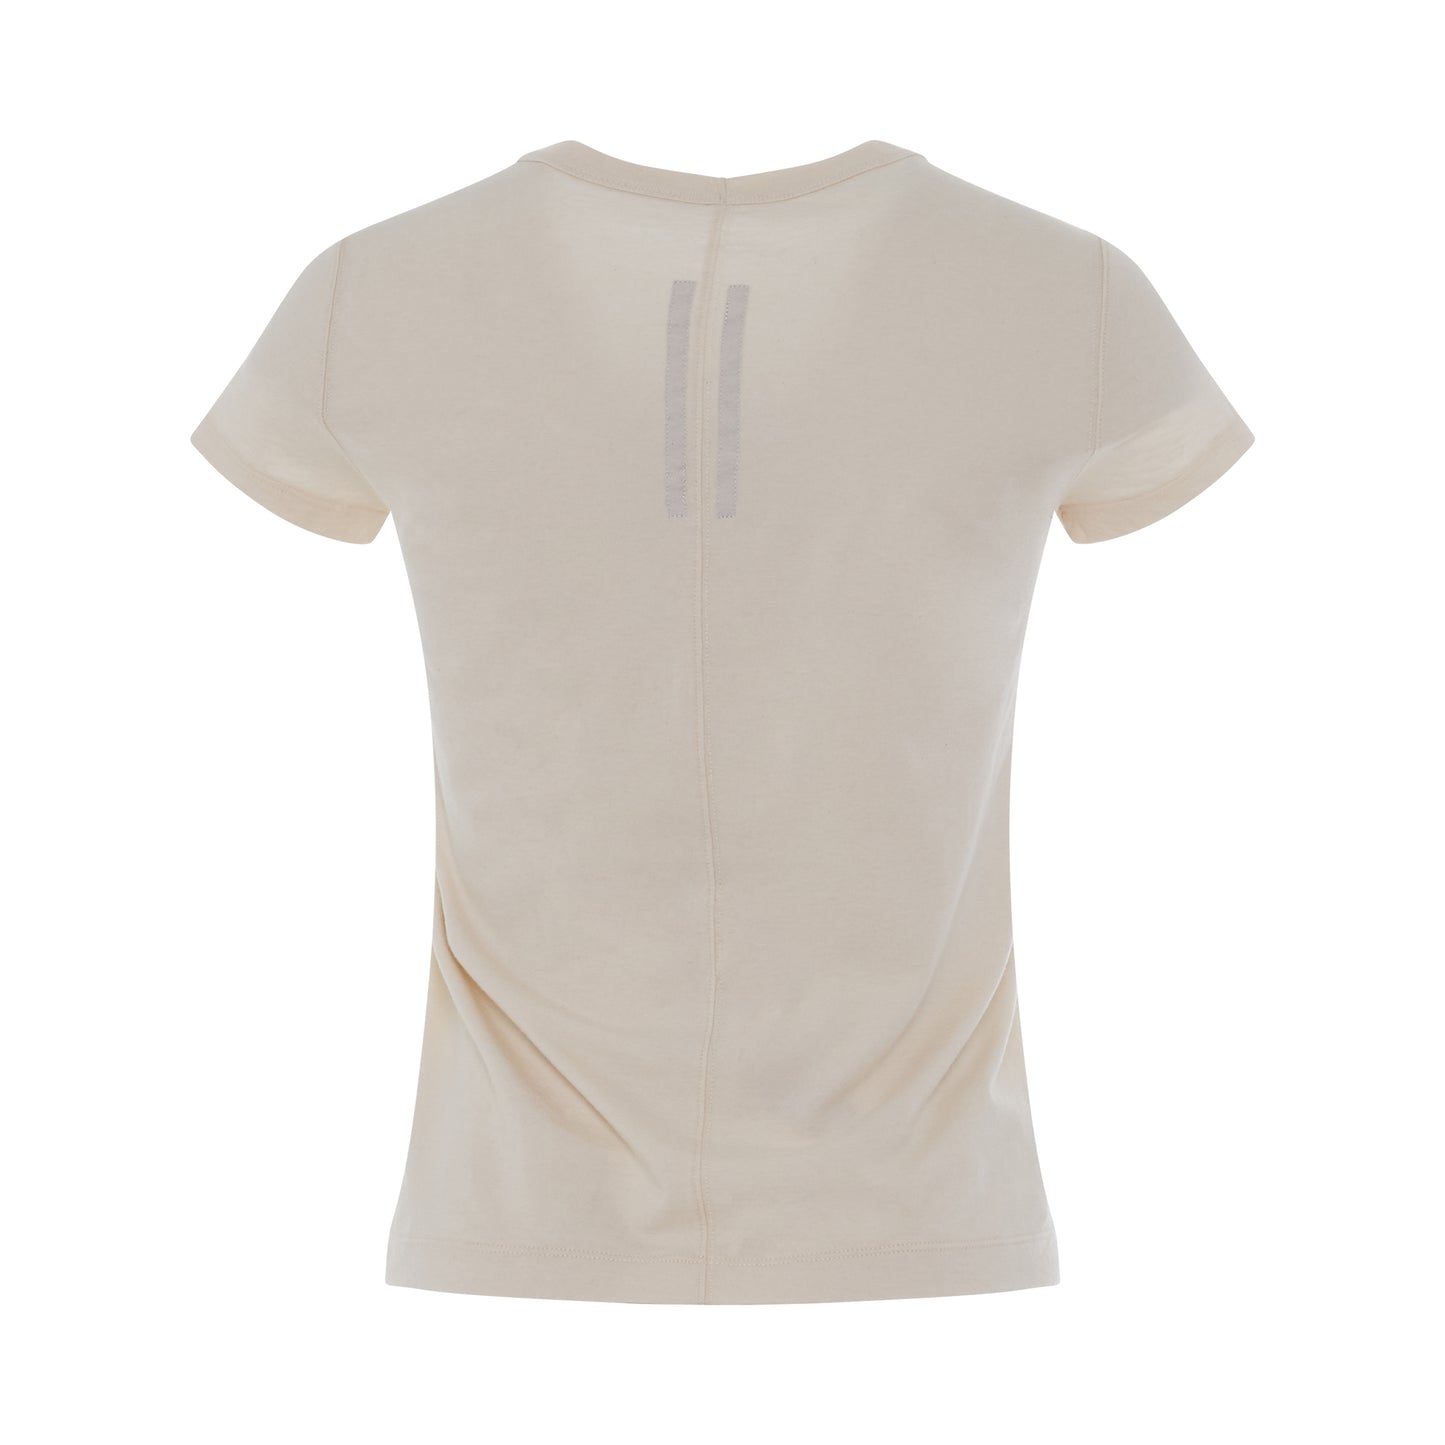 Cropped Level T-Shirt in Natural